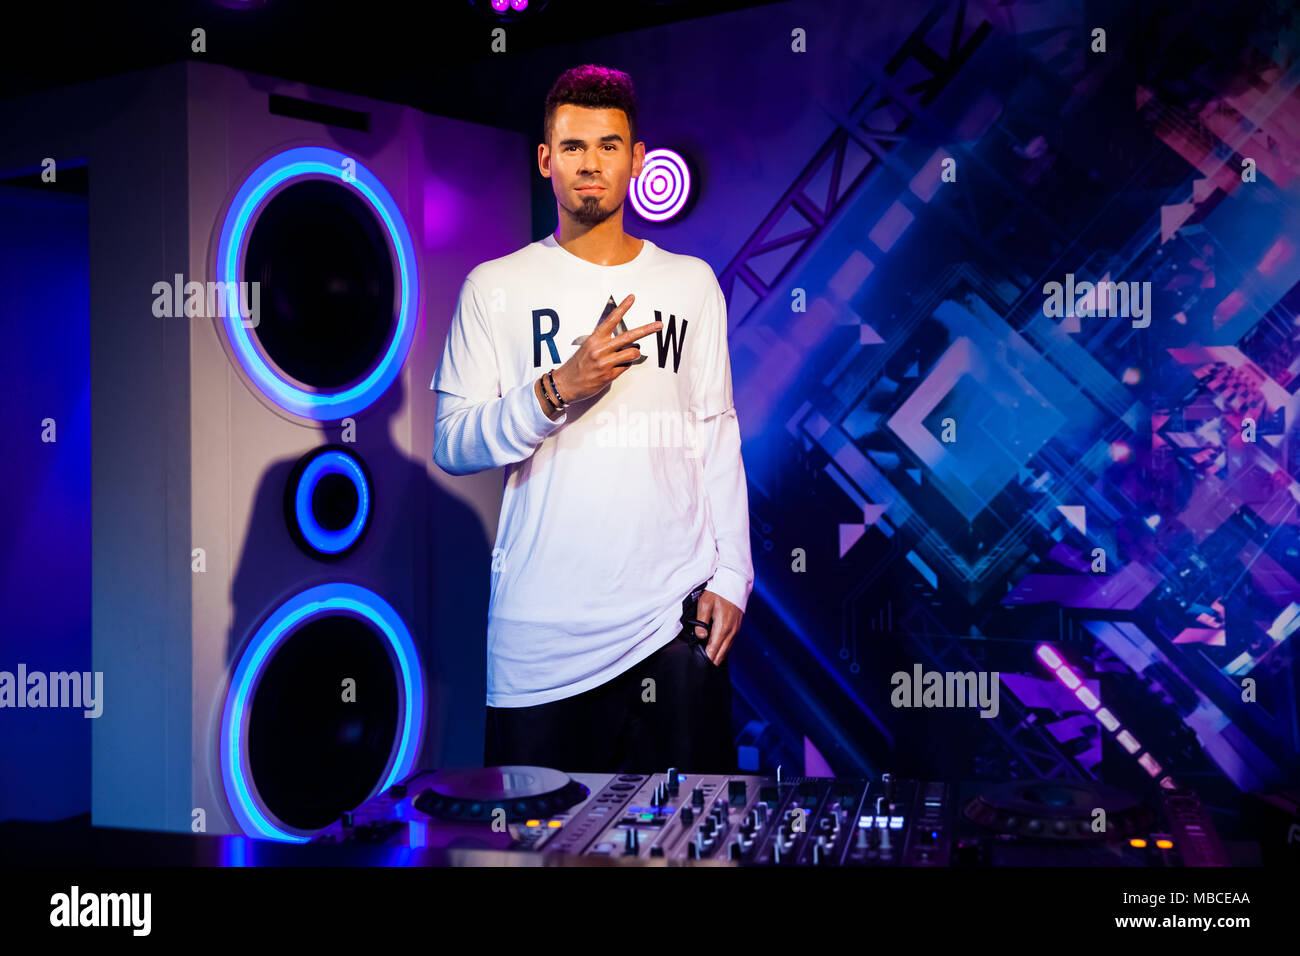 Wax figure of Dutch DJ, record producer and remixer Afrojack in Madame Tussauds Wax museum in Amsterdam, Netherlands Stock Photo